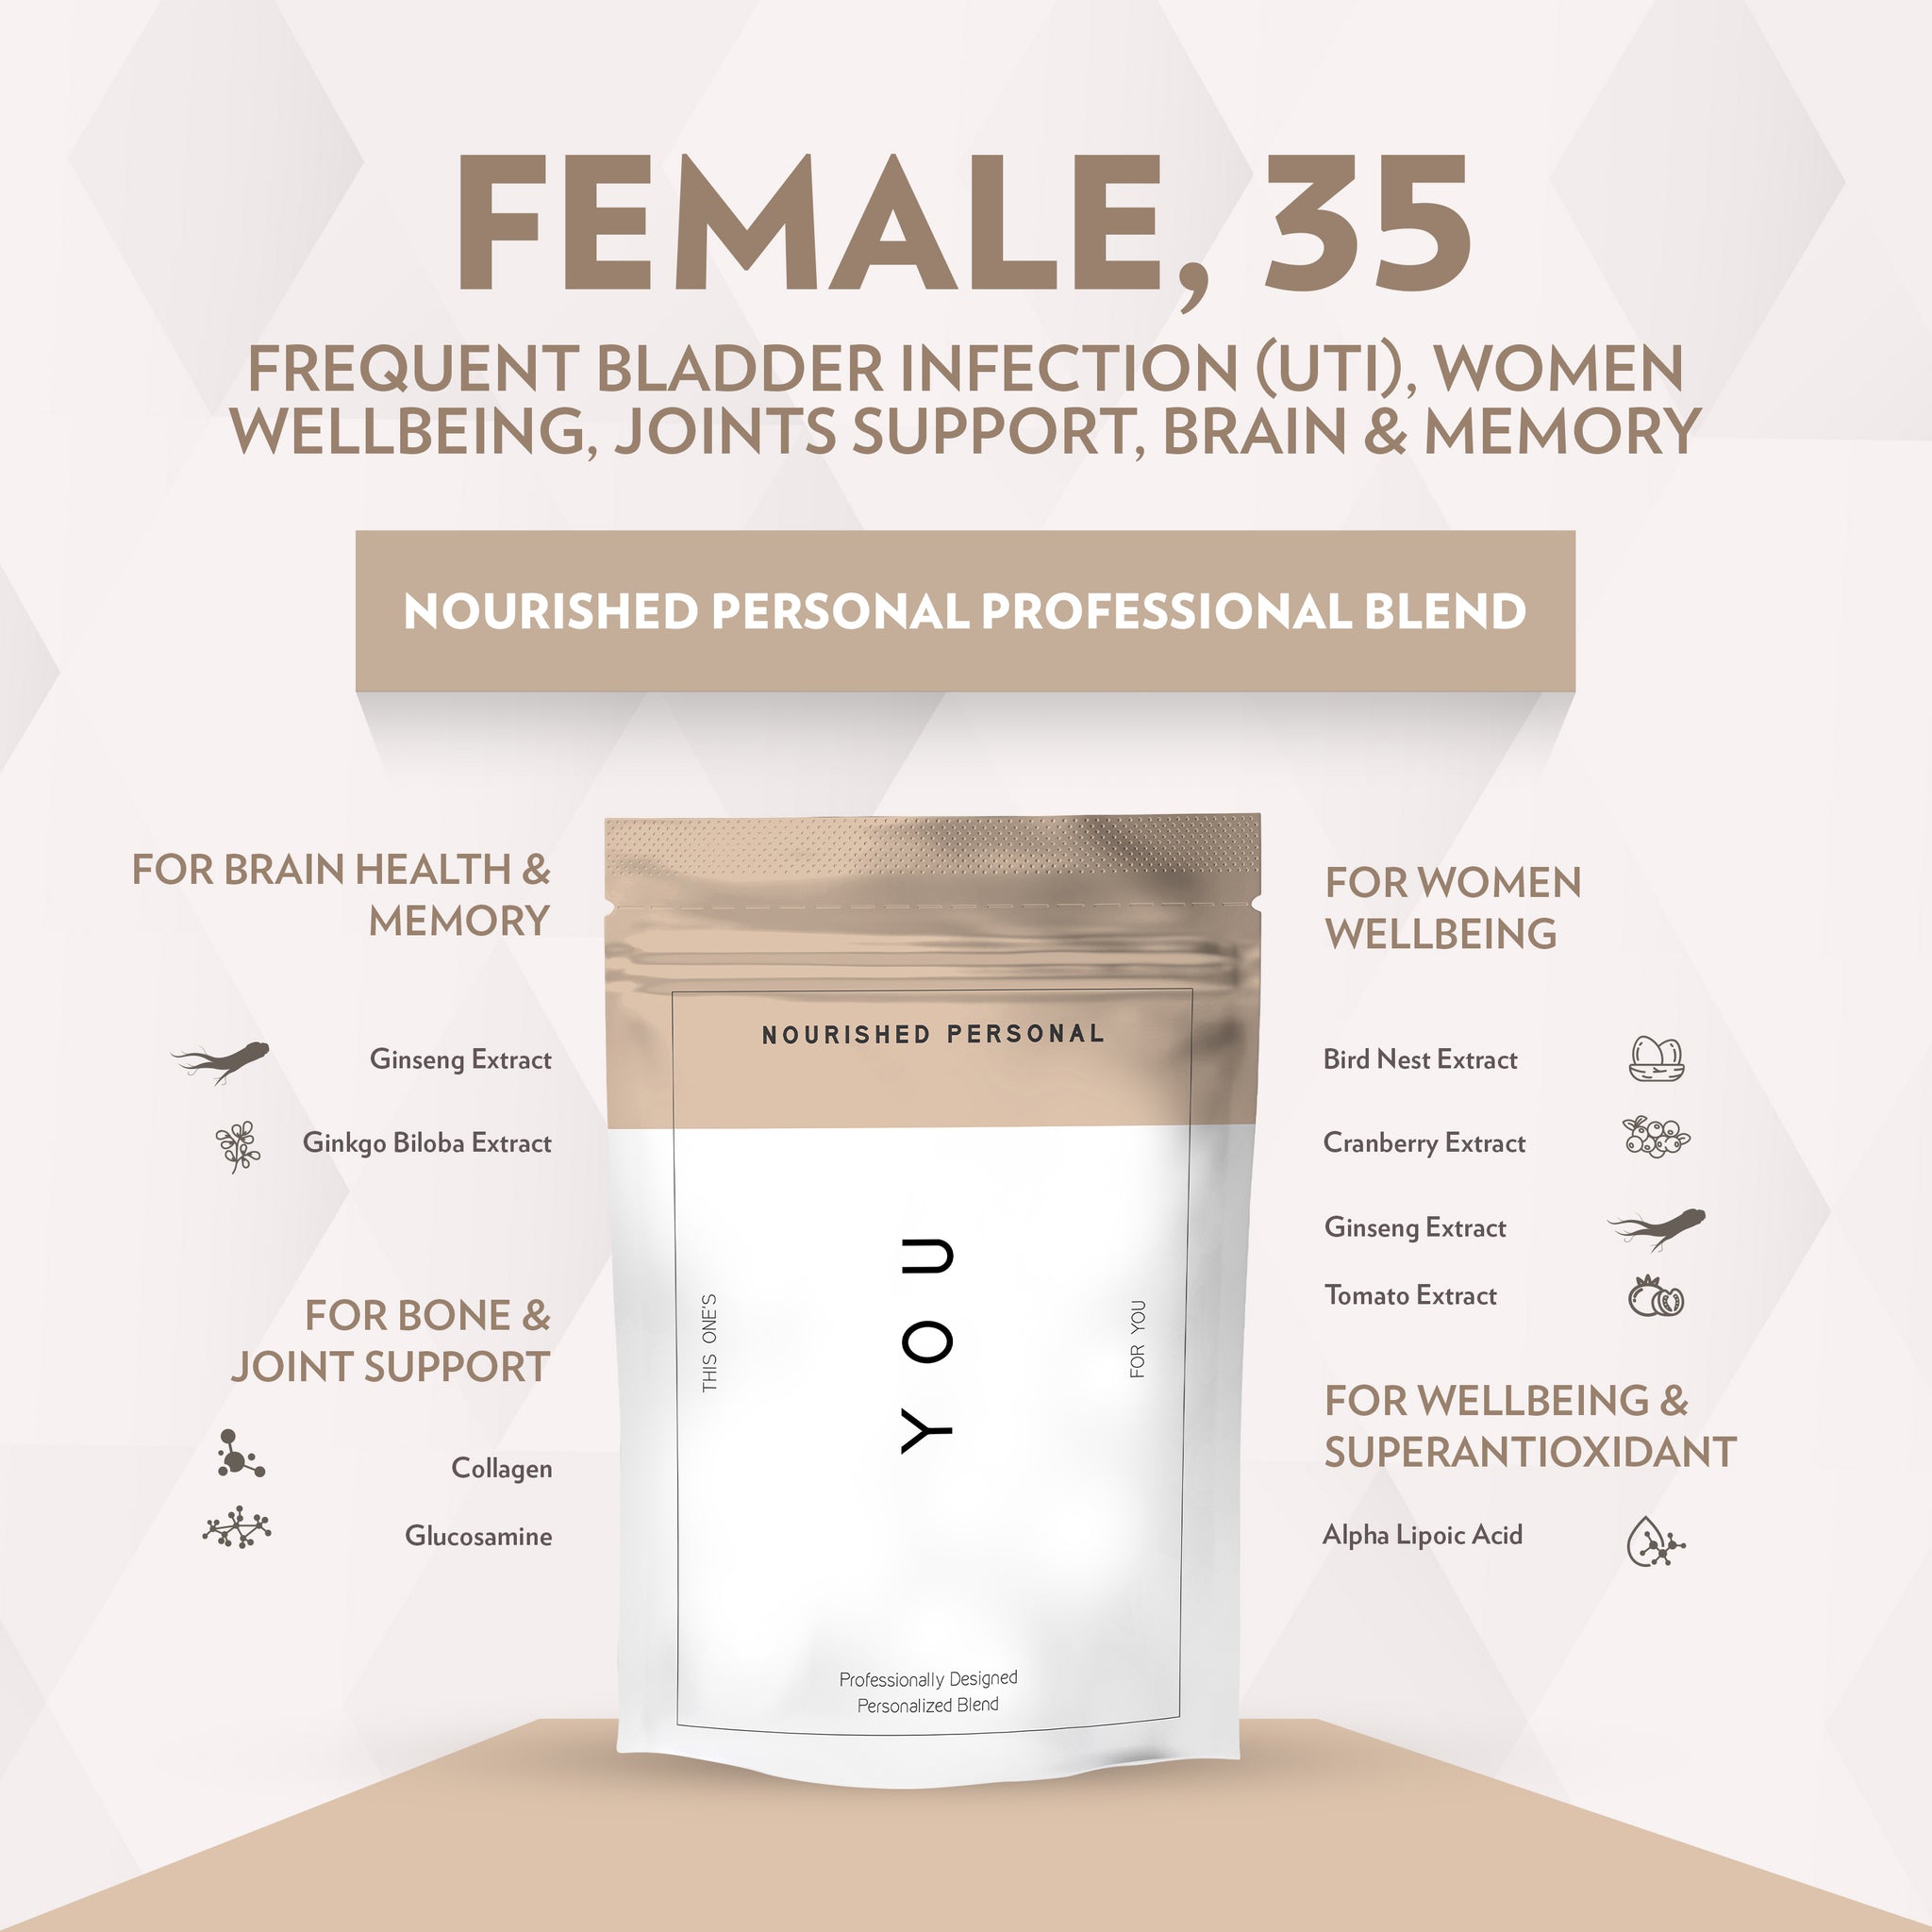 Case Study 40: Female, 35 - Frequent bladder infection (UTI), Women Wellbeing, Joints Support, Brain & Memory